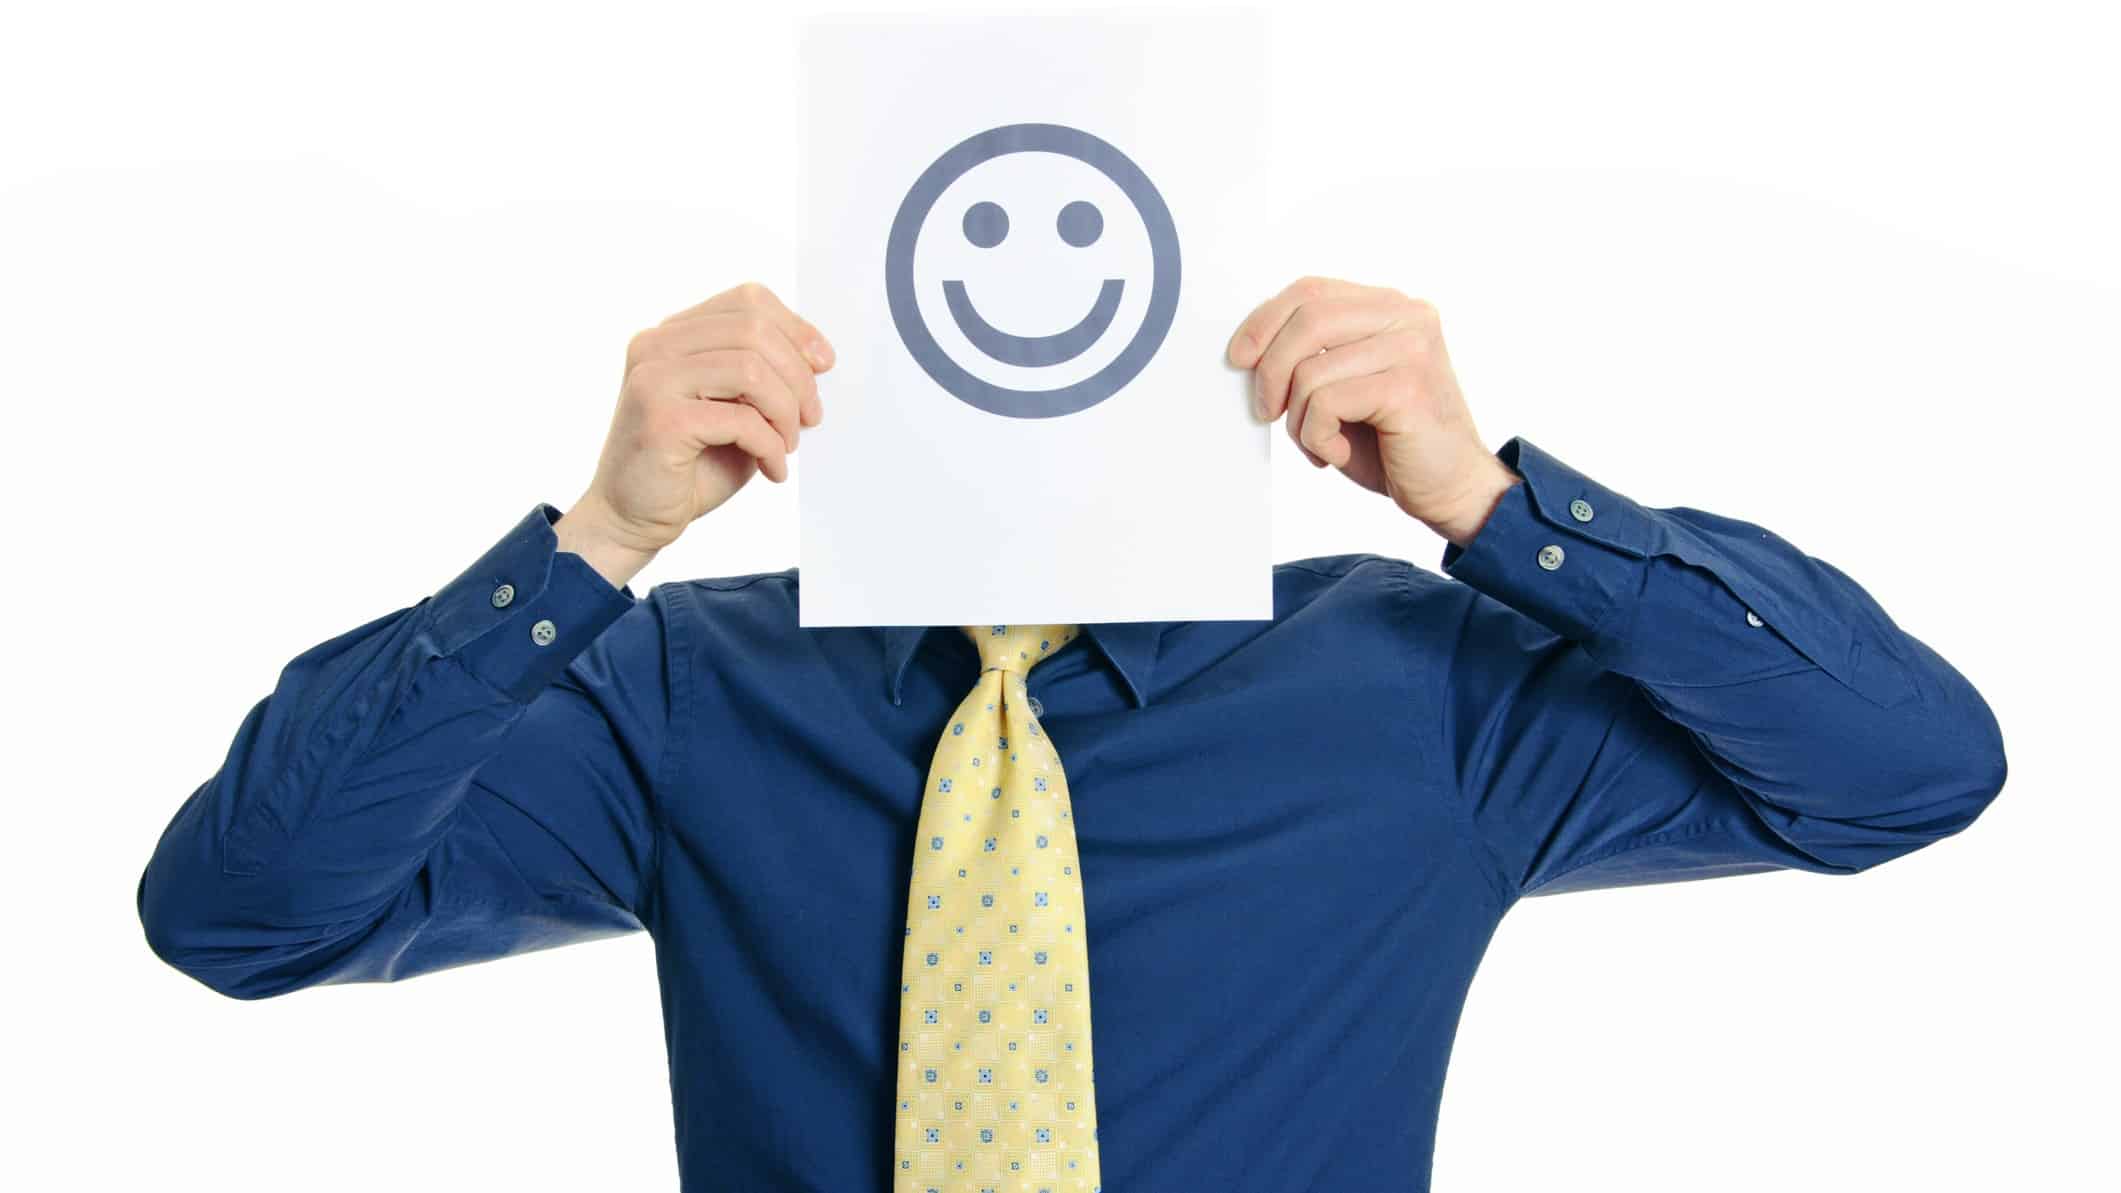 Business man holding a sheet of paper printed with a smily face in front of his own face